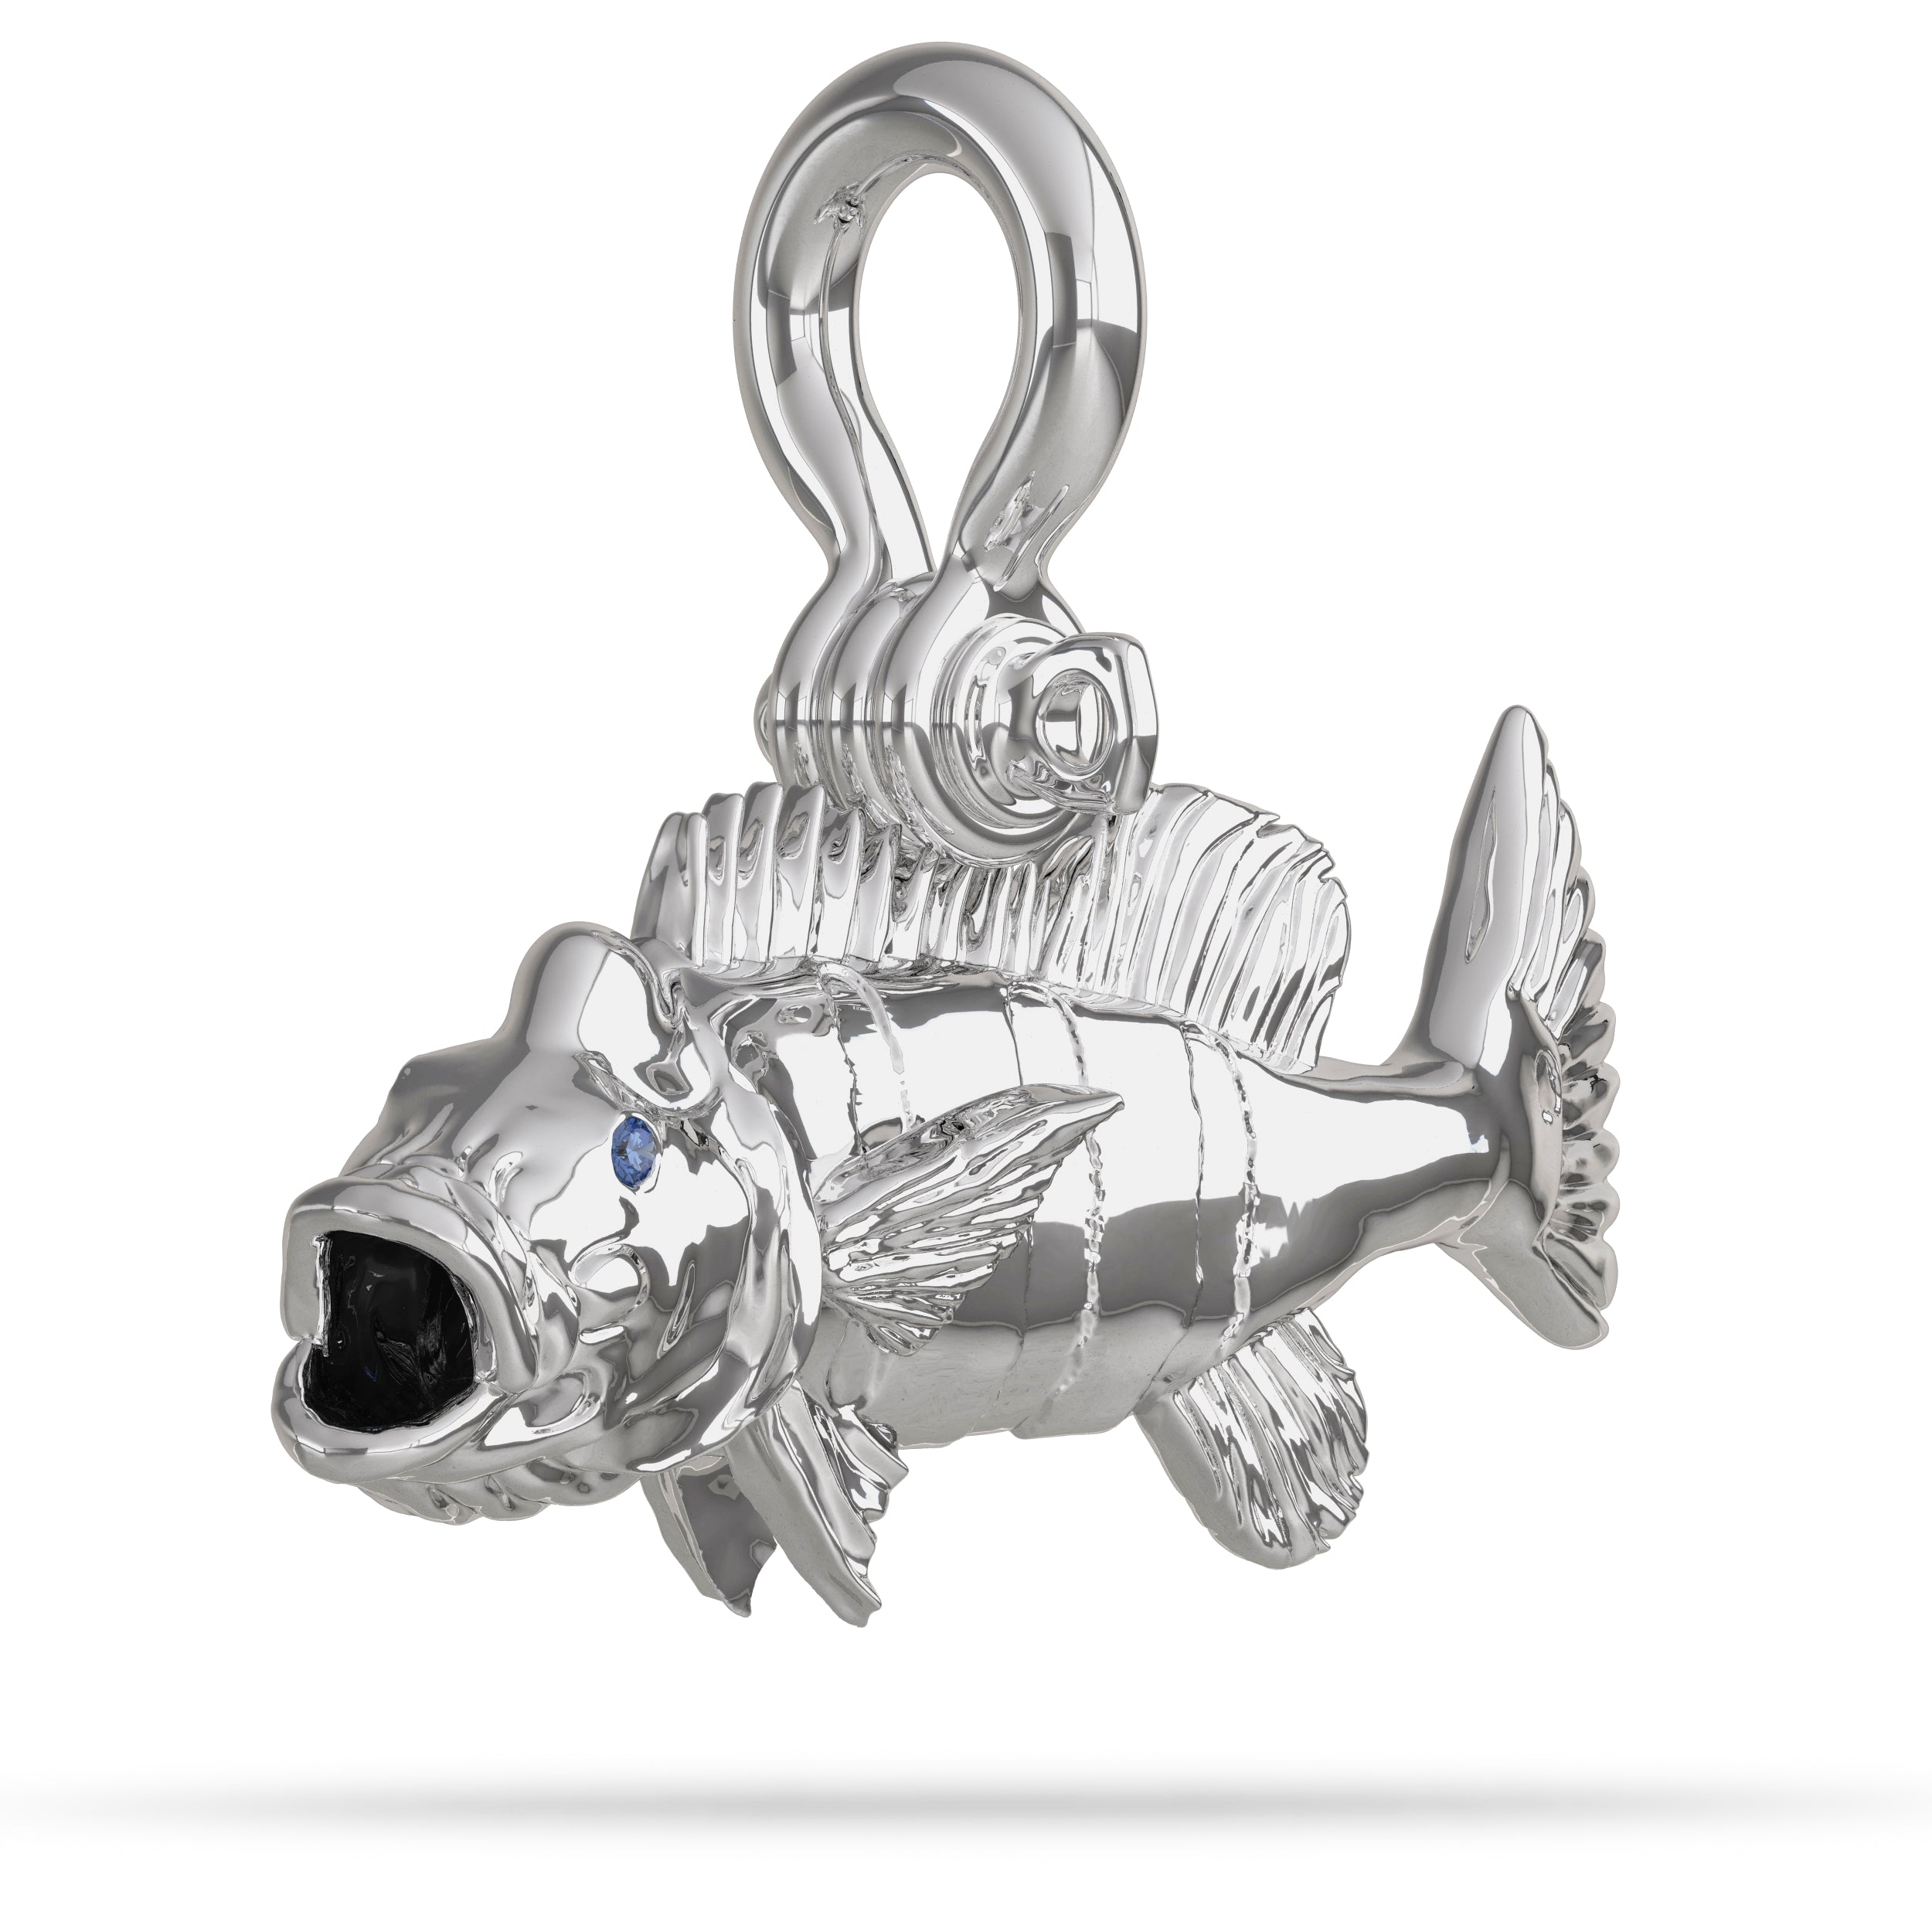  Sterling Silver Peacock Bass Pendant High Polished Mirror Finish With Blue Sapphire Eye And A Mariner Shackle Bail Custom Designed By Nautical Treasure Jewelry In The Florida Keys 